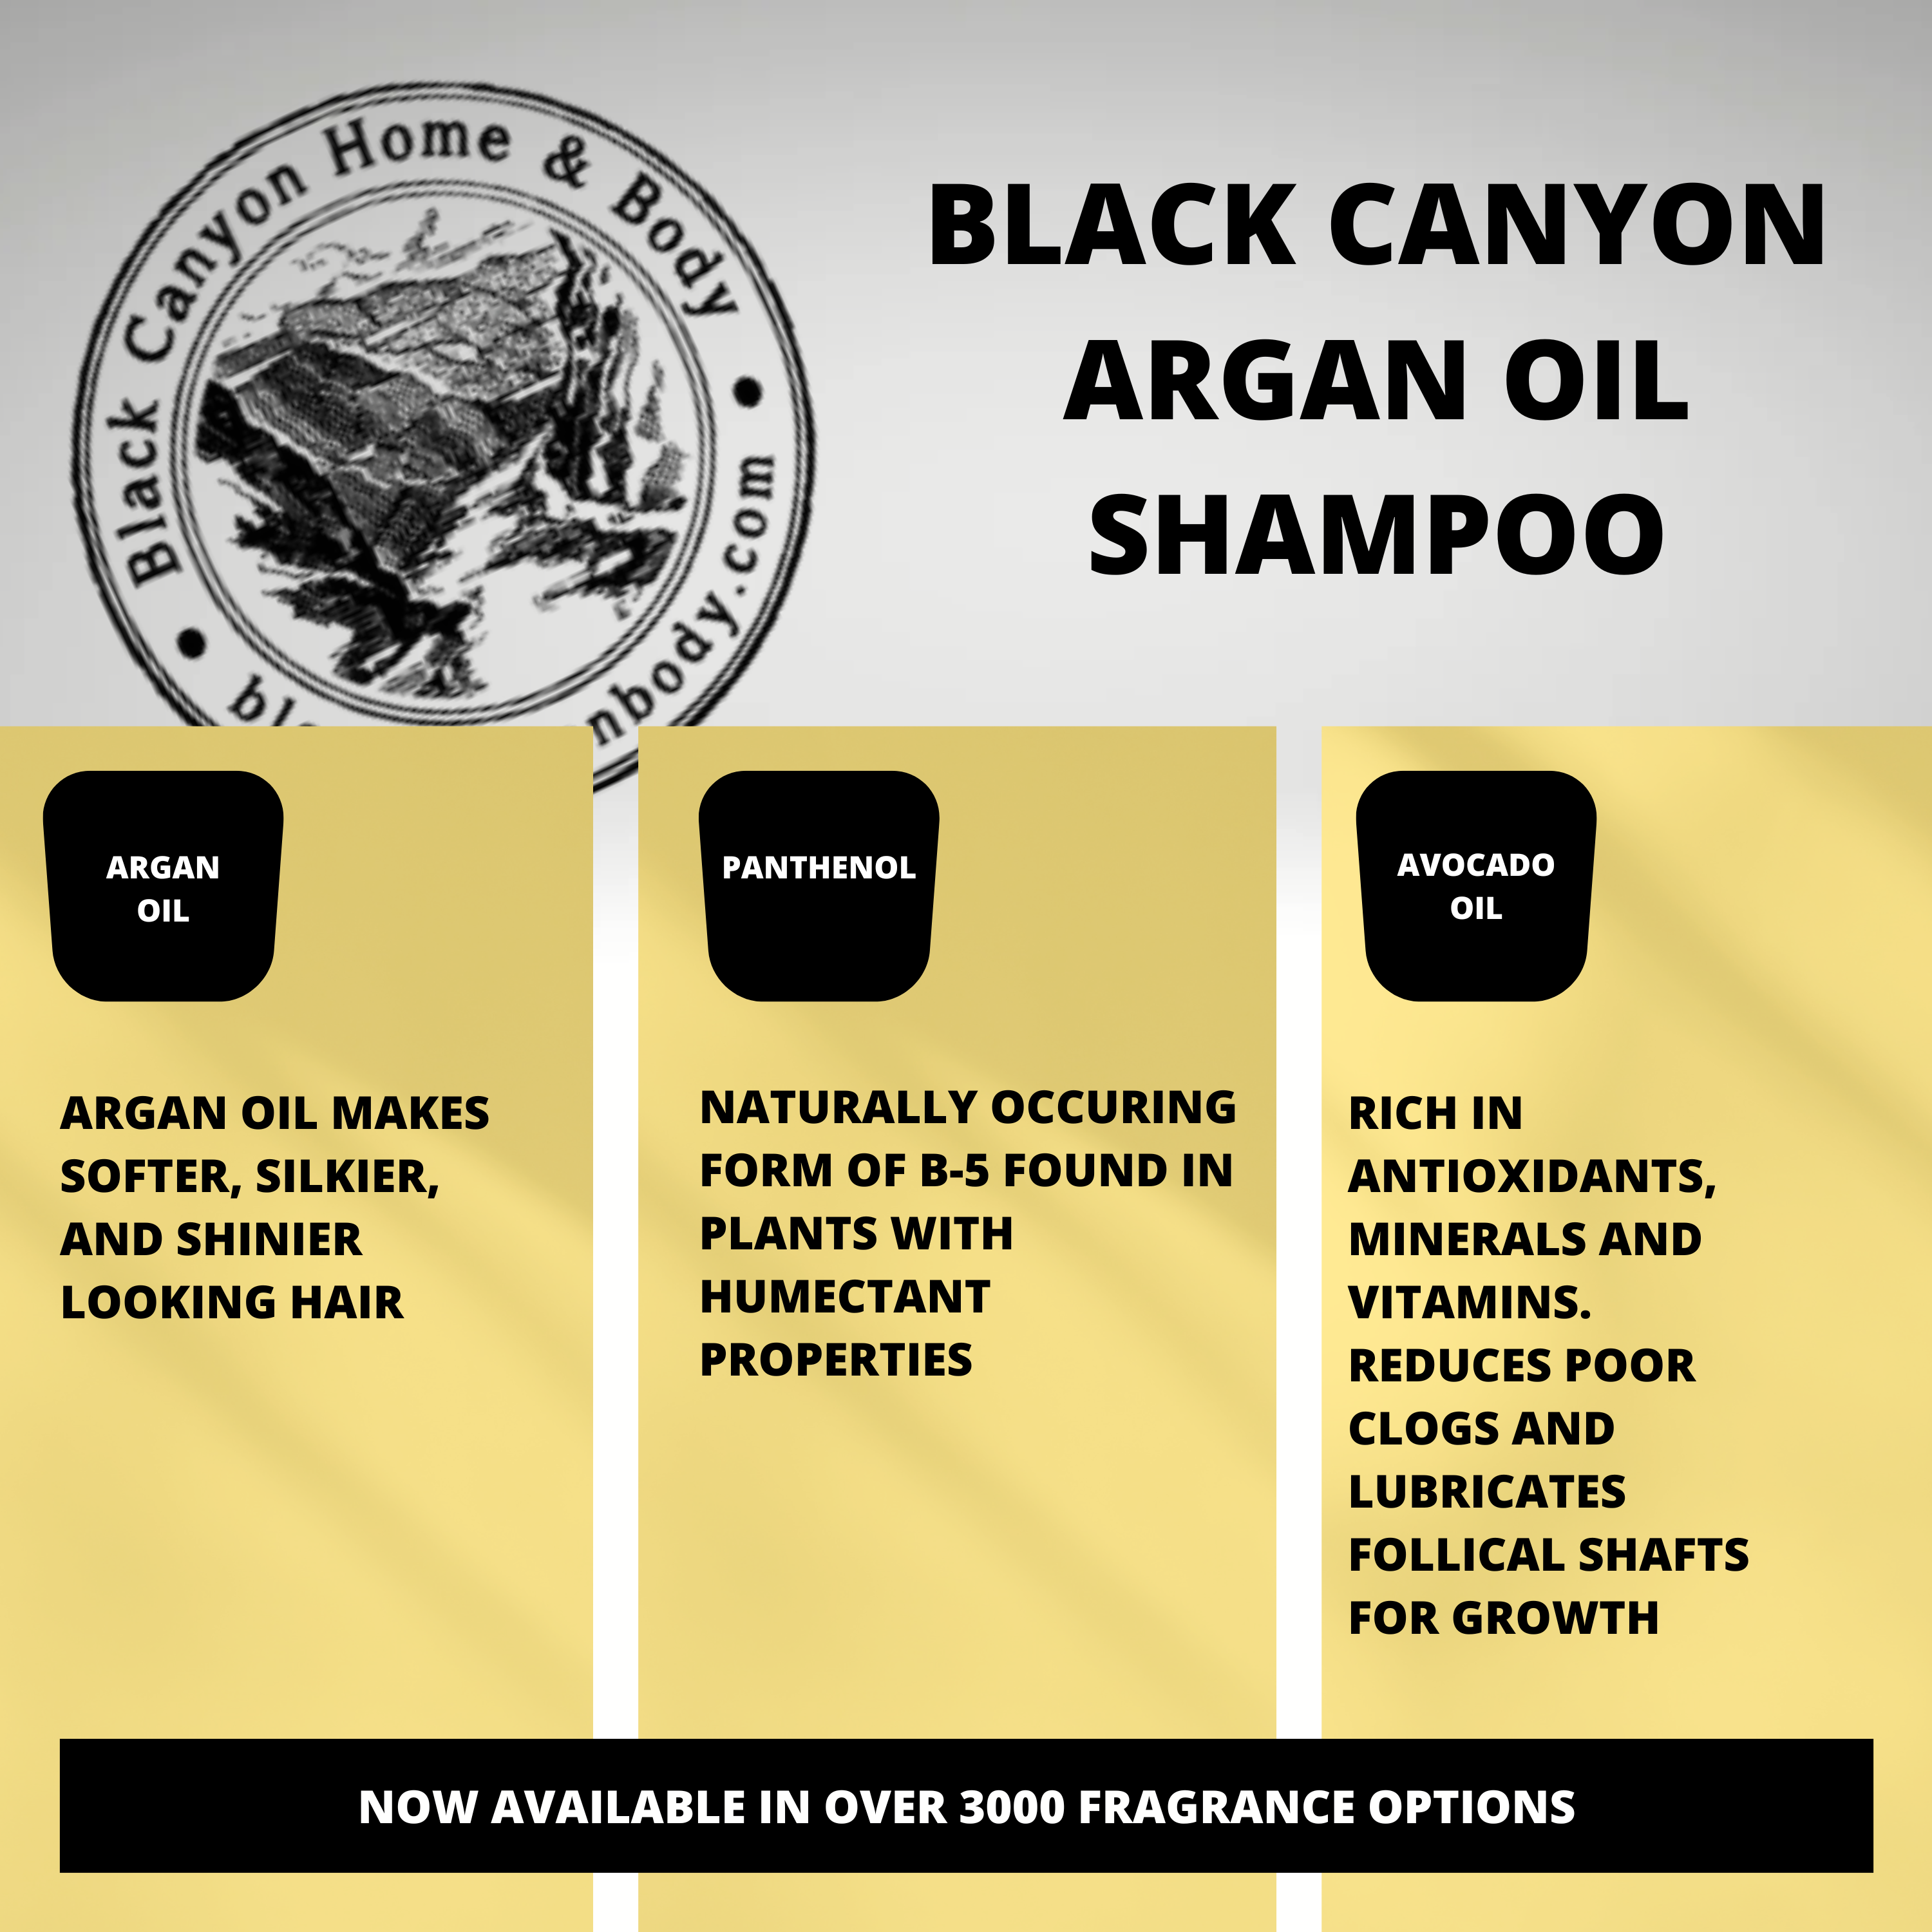 Black Canyon Blackberry Tangerine Scented Shampoo with Argan Oil